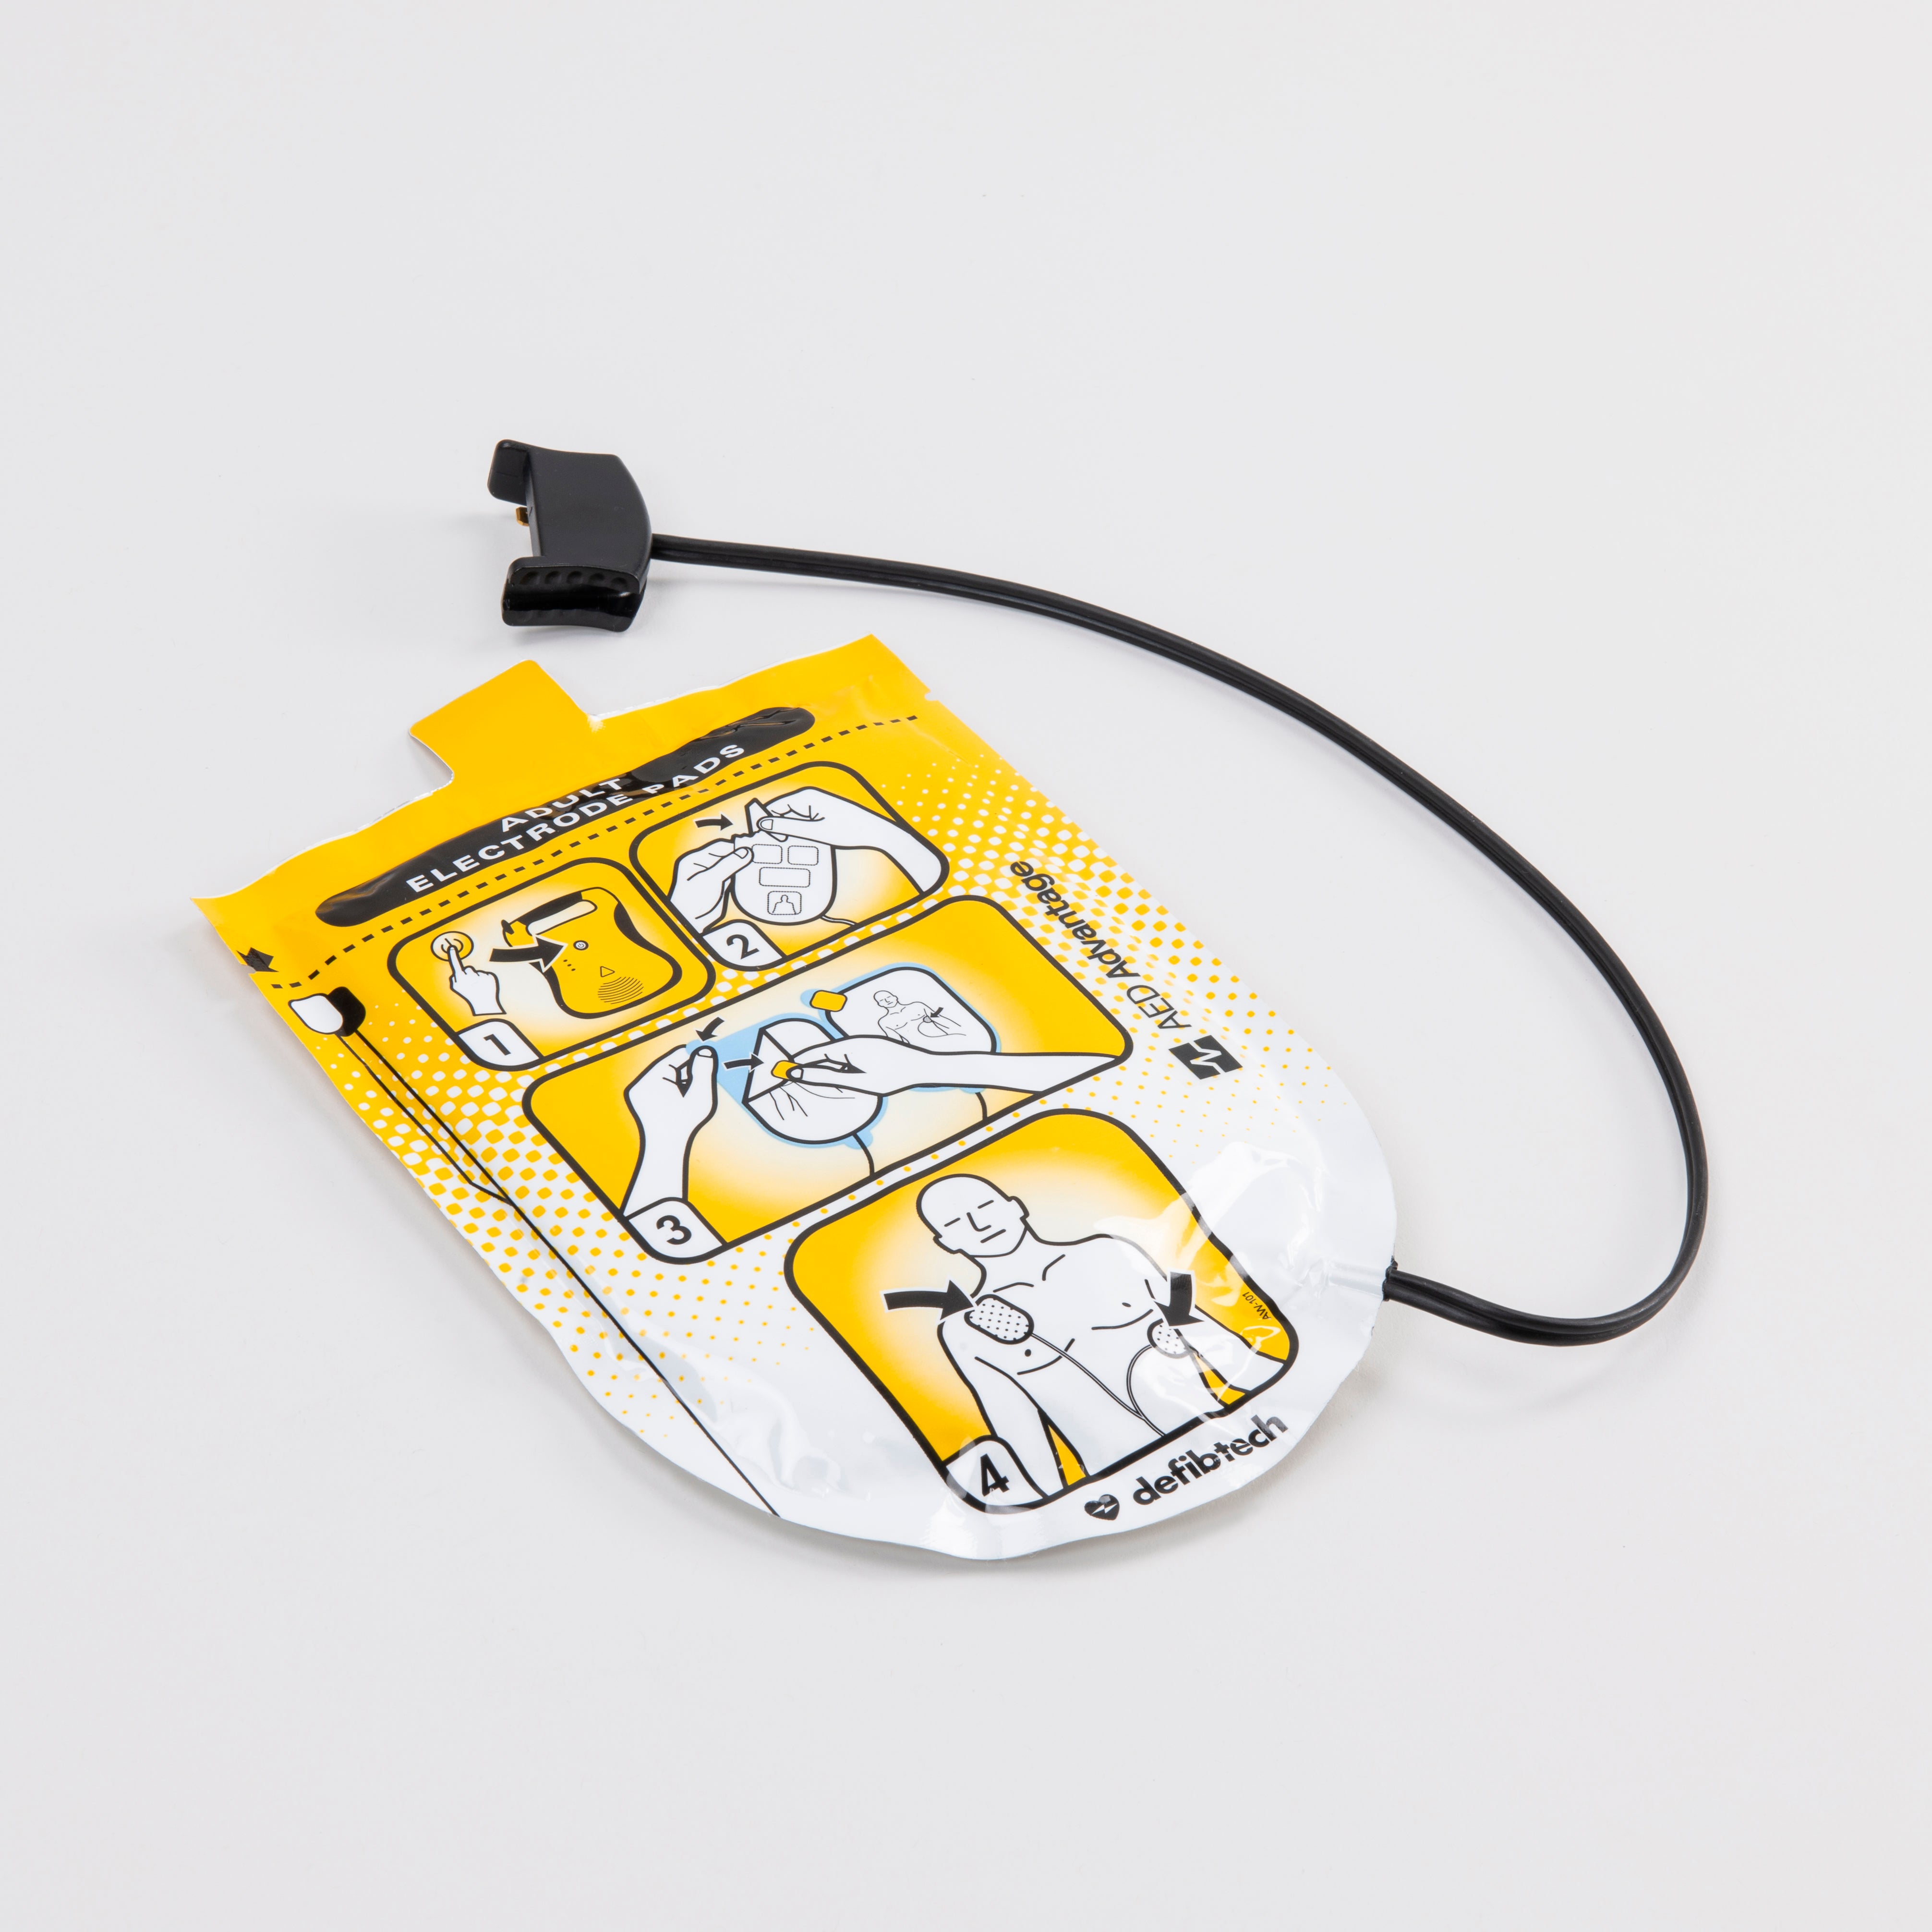 A set of adult Defibtech Lifeline electrodes encased in their yellow foil wrap with a black connector cord